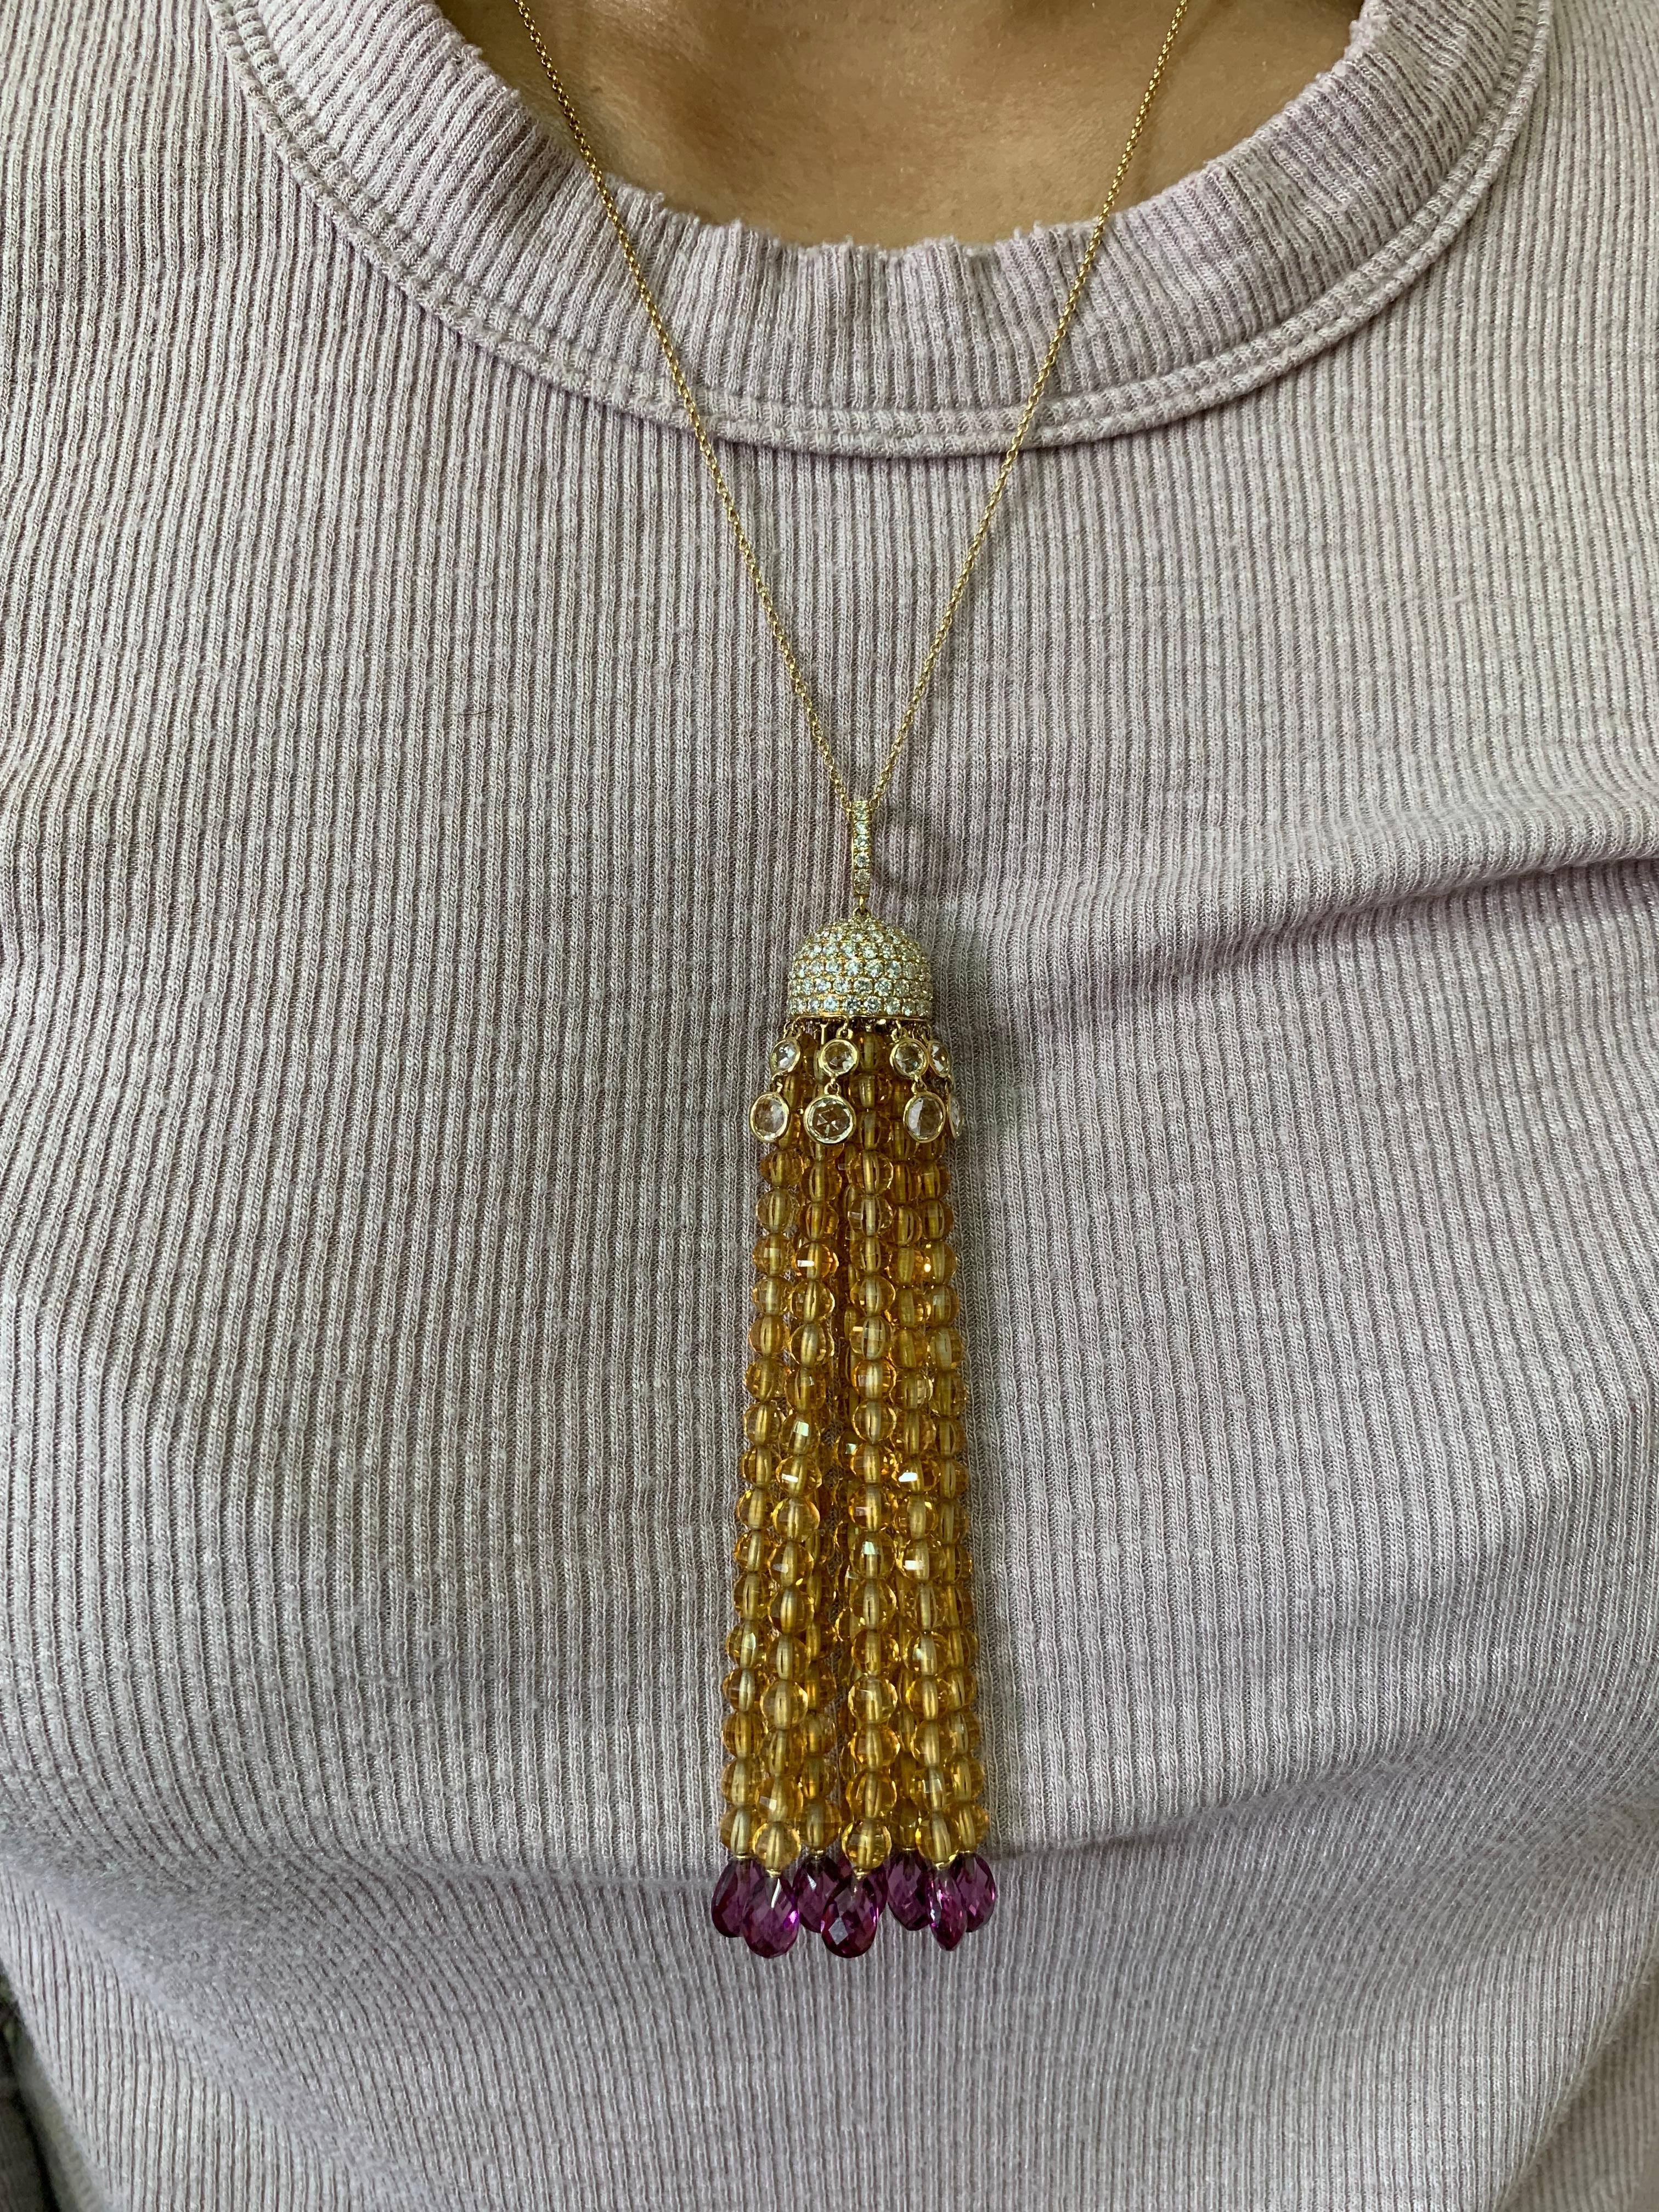 This is an elegant citrine, rhodolite garnet, and crystal necklace using a mixture of cuts to accentuate the beauty of the gemstones. This is a light and fun drop necklace with a pop of color with the use of these colorful gems.

Designer citrine,